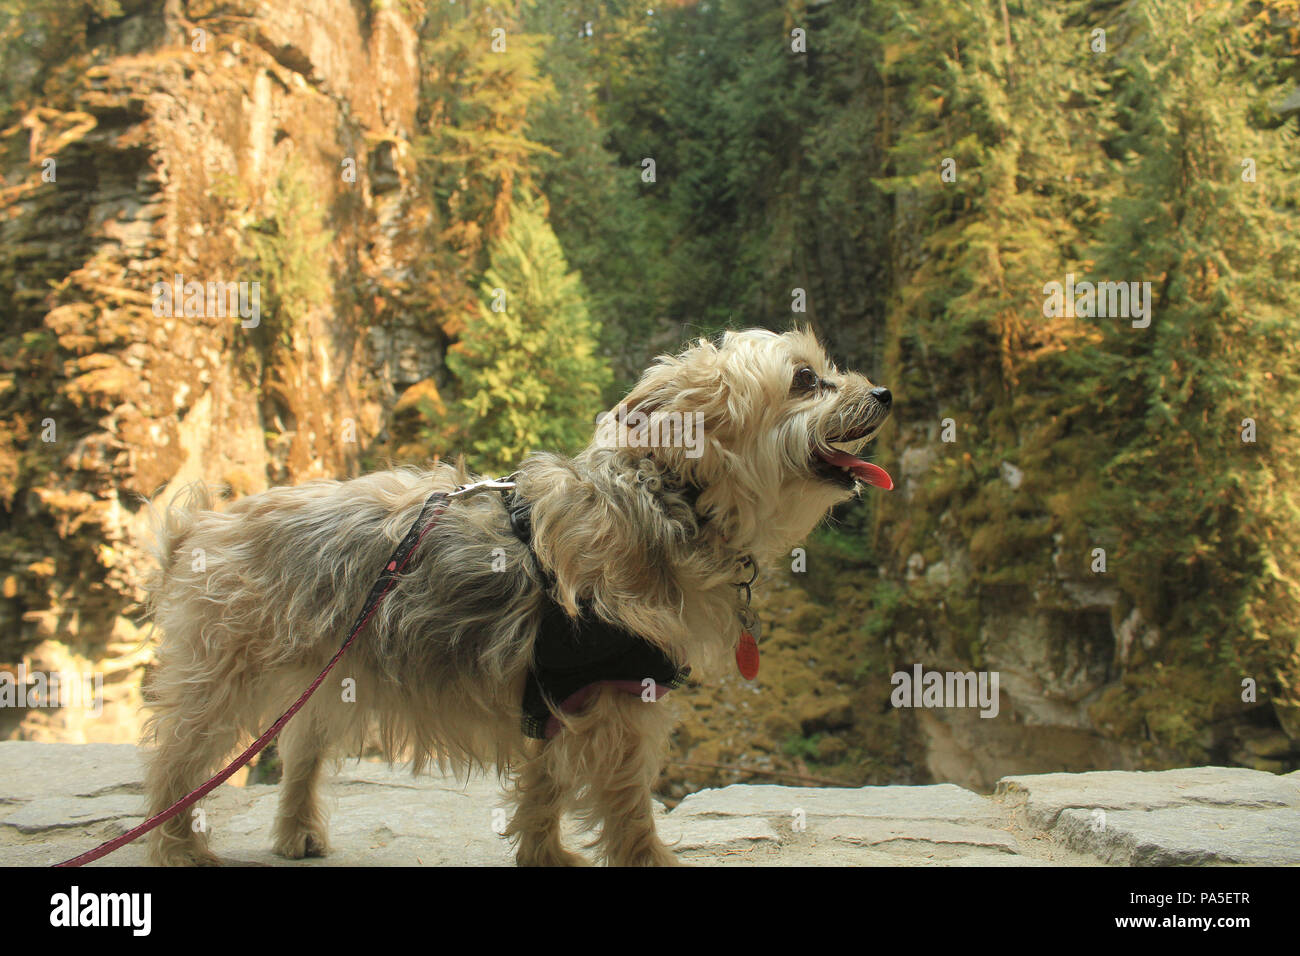 A silky terrier standing on a wall with cliffs and forest in the background Stock Photo